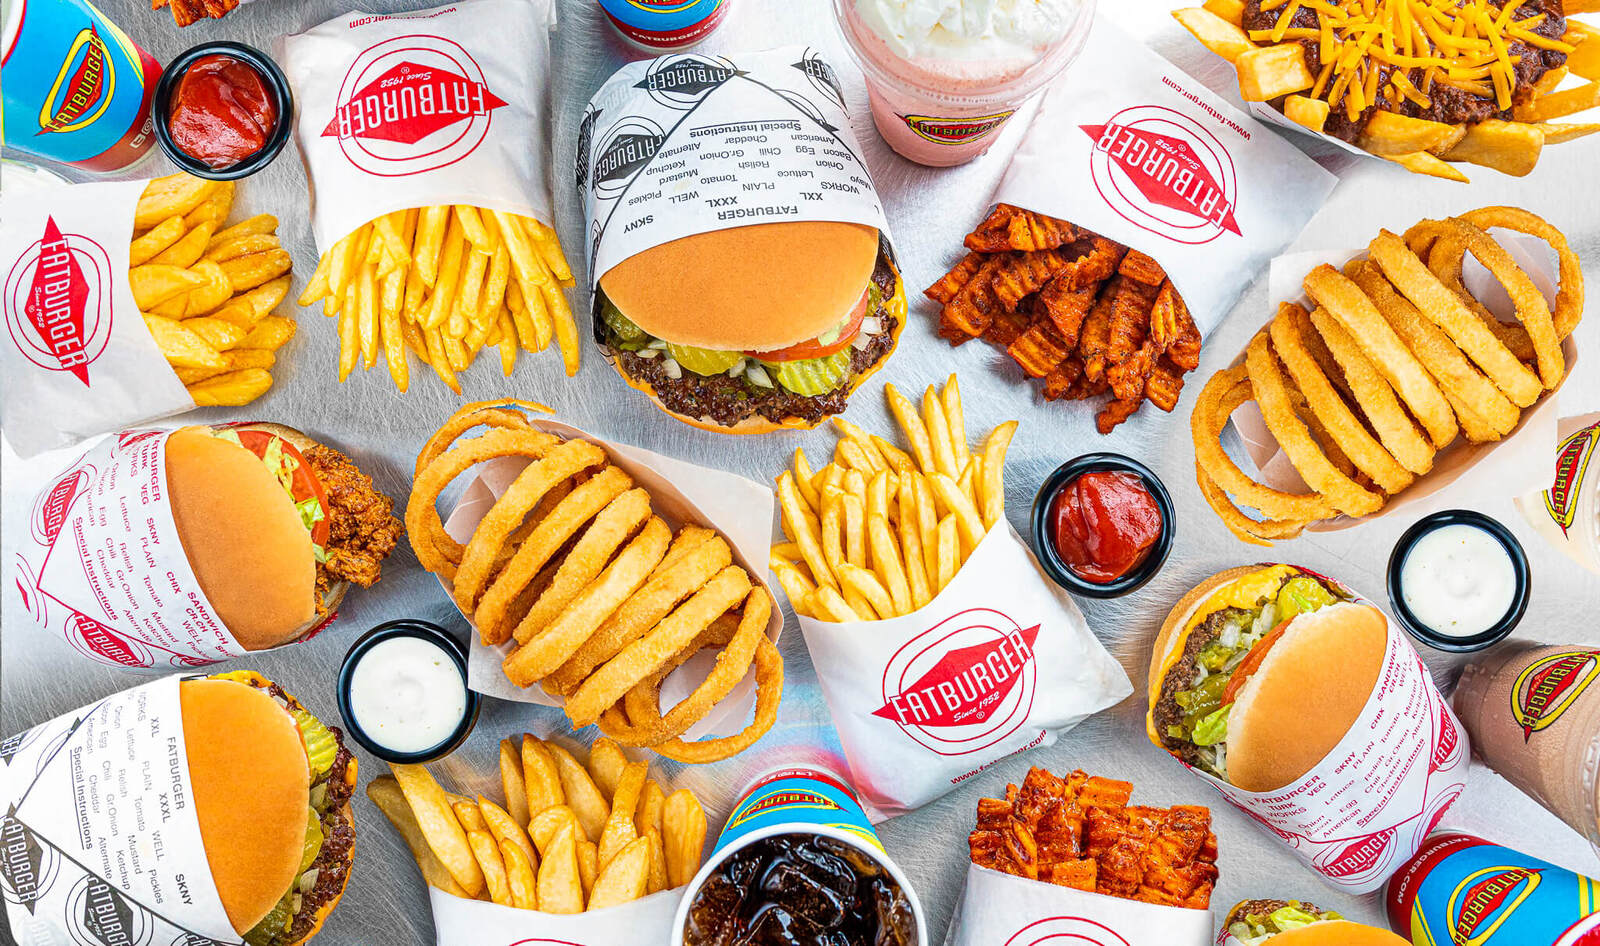 Fatburger’s CEO on the Future of Vegan Fast Food